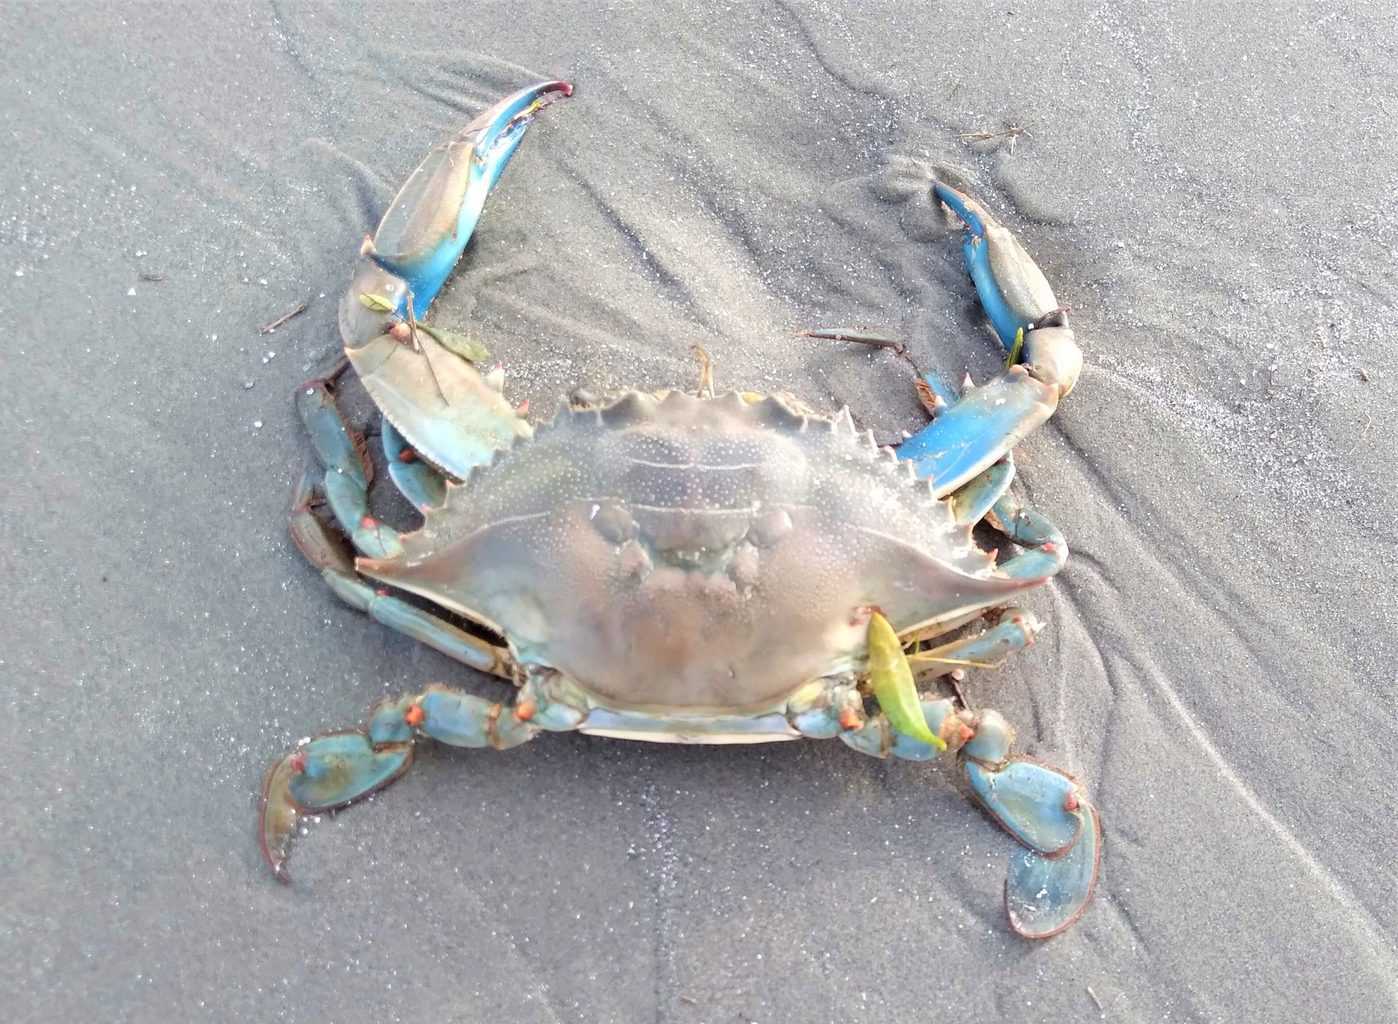 How long can live crabs stay out before cooking?